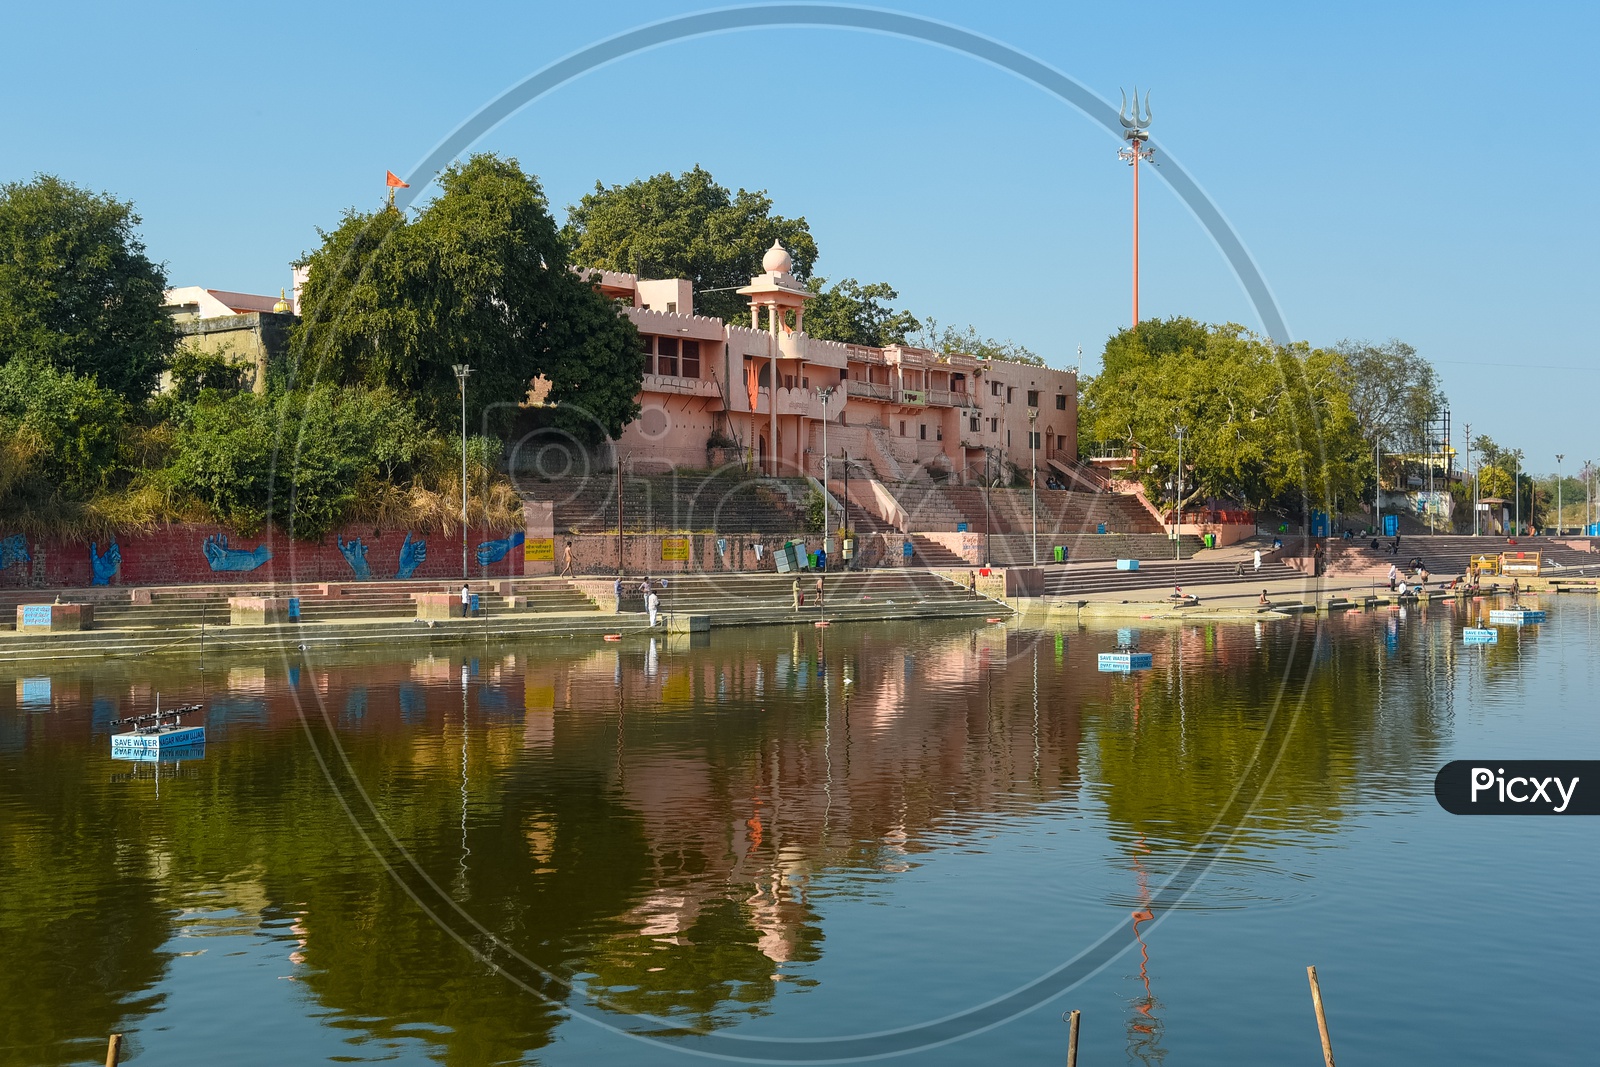 Temple on banks of River Shipra at Ram Ghat